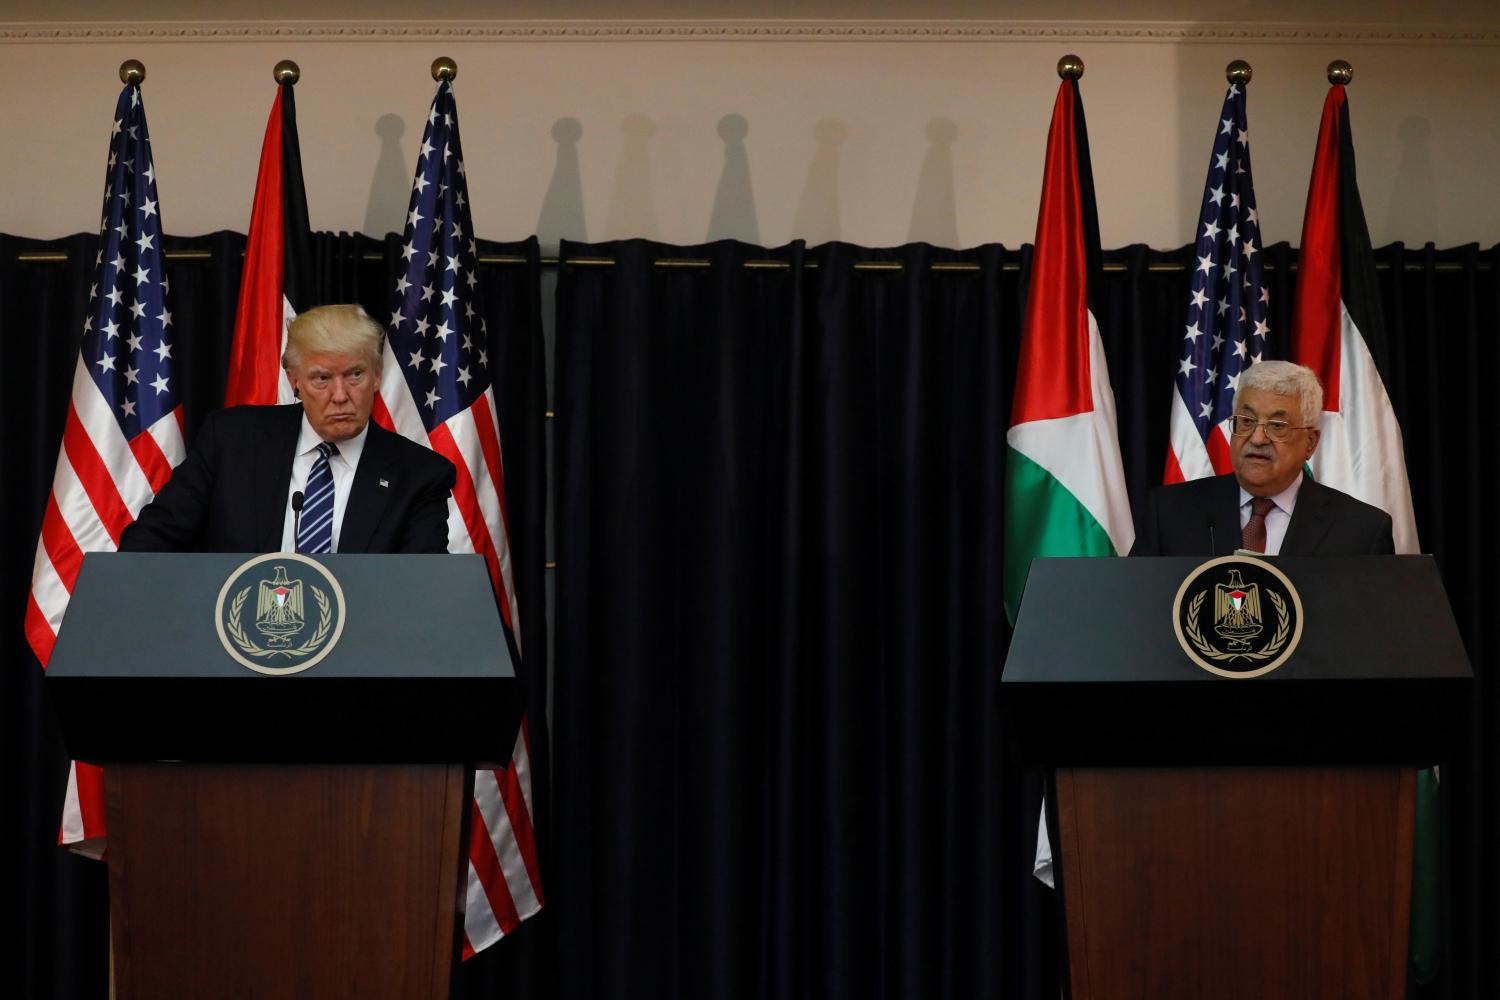 U.S. President Donald Trump and Palestinian President Mahmoud Abbas deliver remarks after their meeting at the Presidential Palace in the West Bank city of Bethlehem May 23, 2017. REUTERS/Jonathan Ernst - RTX375L8